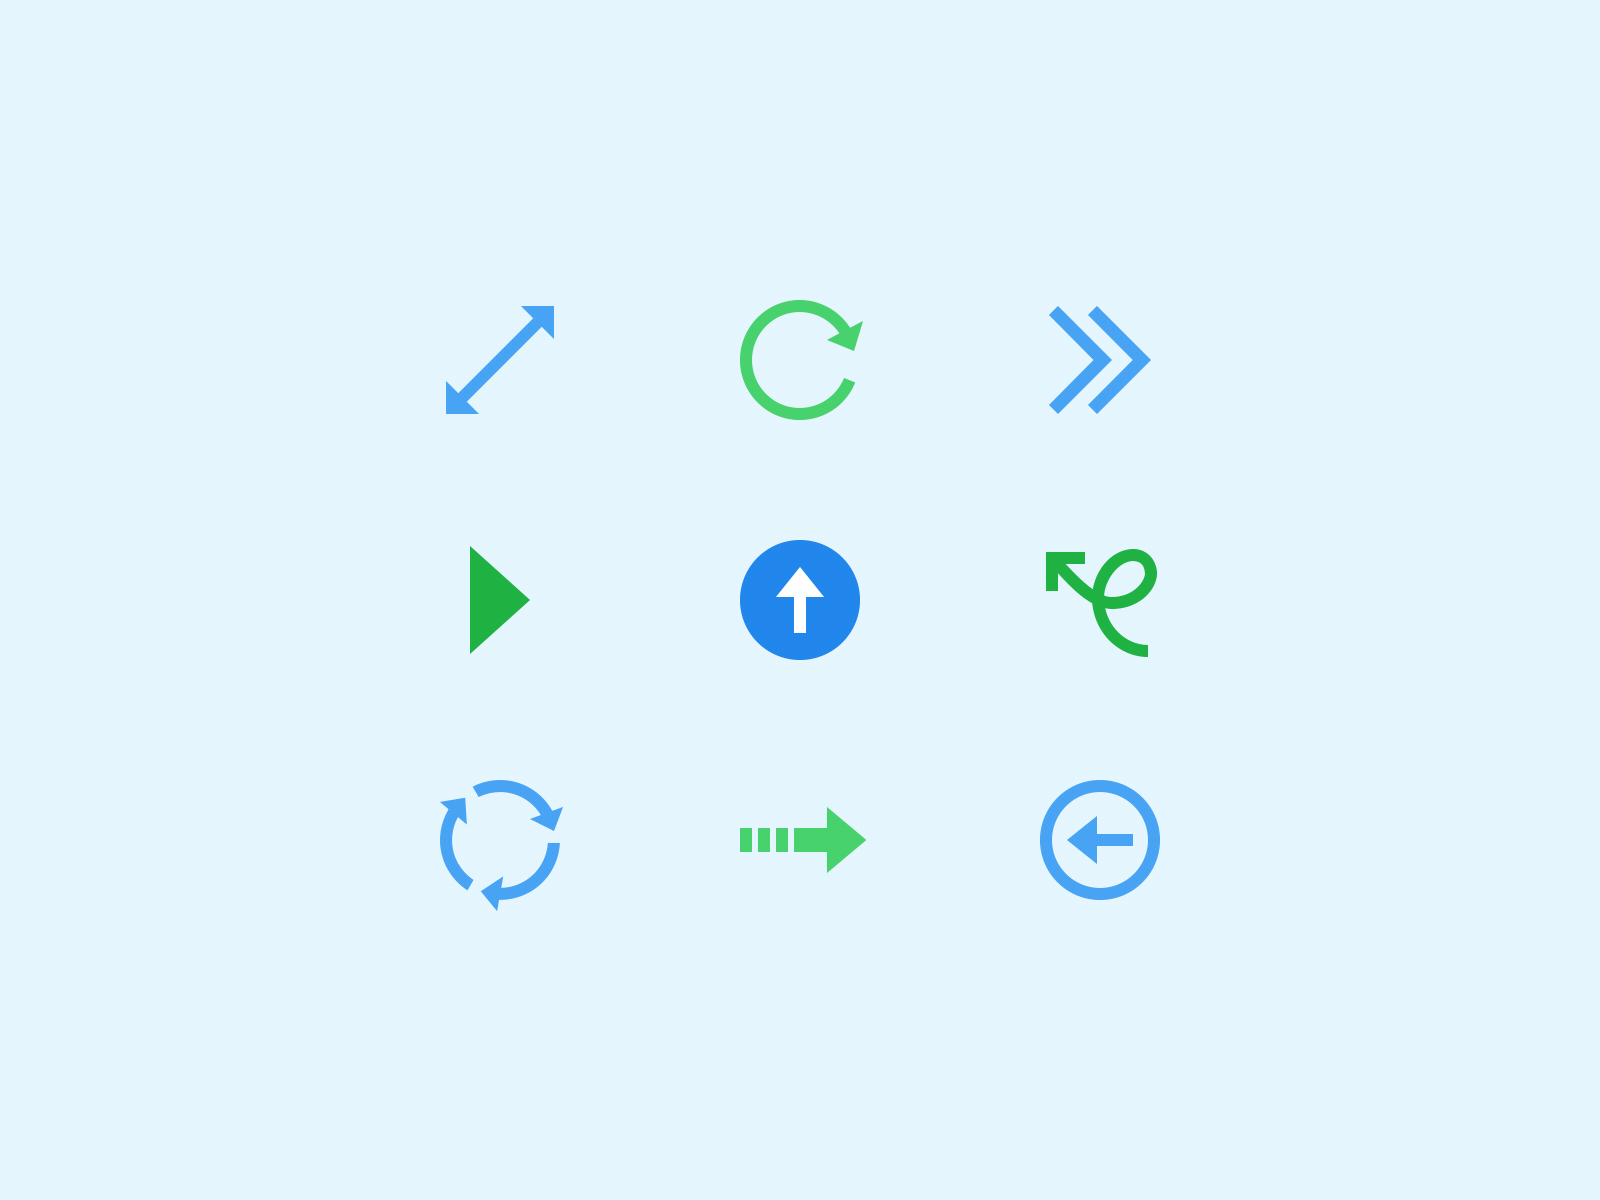 Animated Arrows by Margarita Ivanchikova for Icons8 on Dribbble